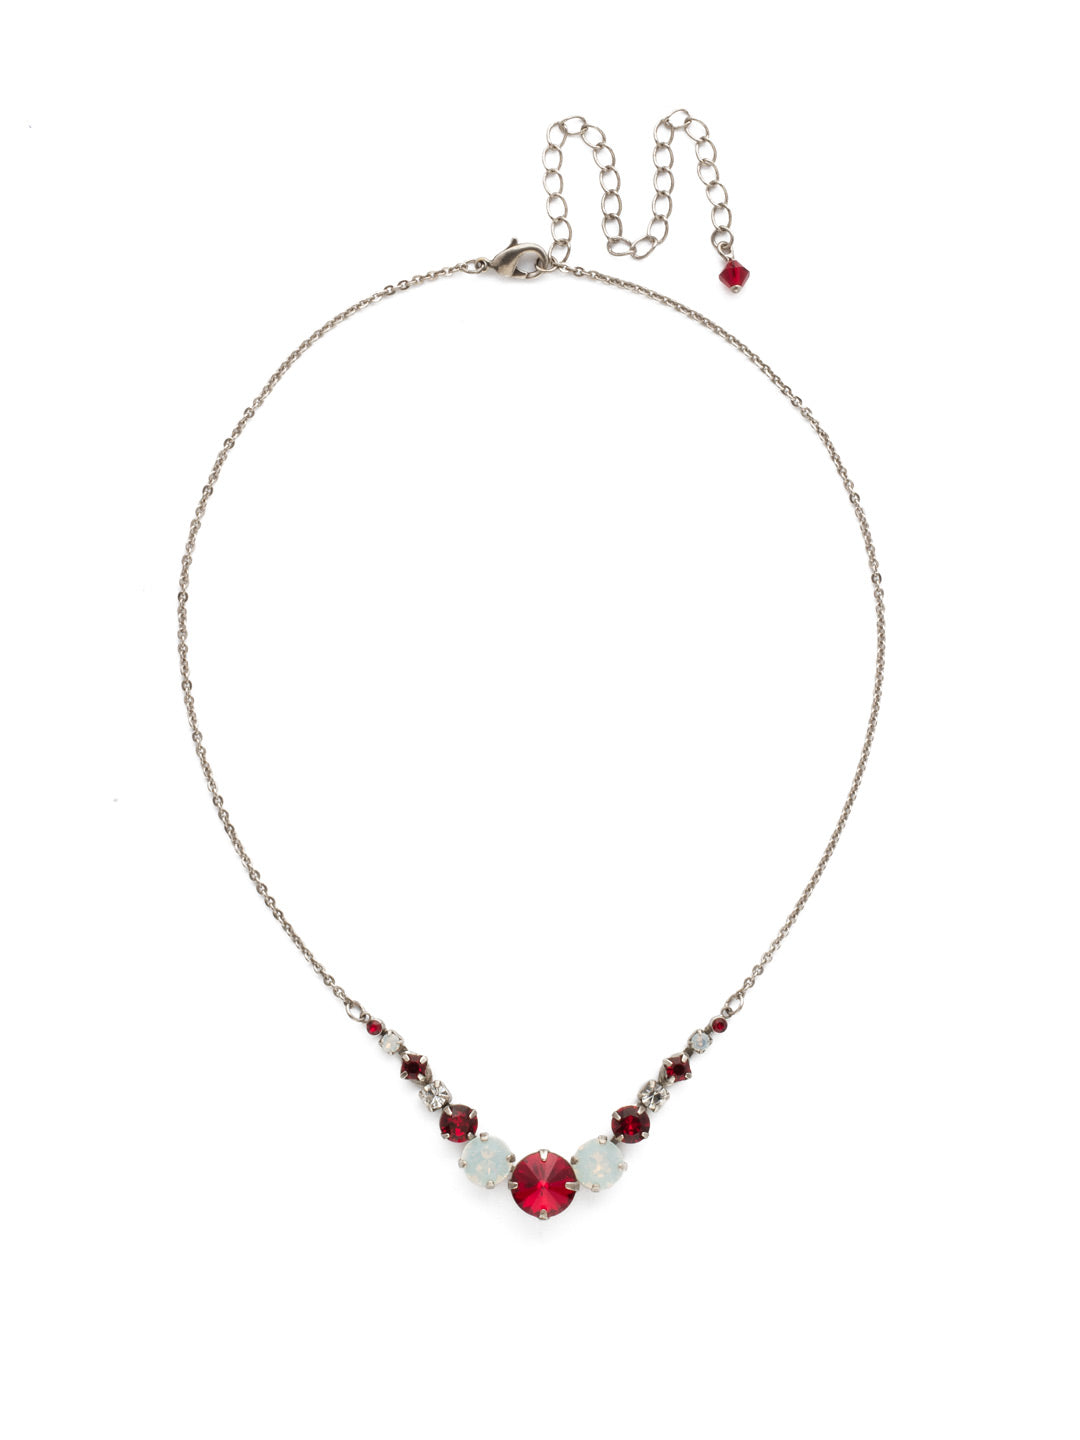 London Tennis Necklace - NCQ14ASCP - A long, simple chain paired with gorgeous round stones is exactly what every girl needs to dress things up. This round stone necklace is perfect for layering, or to just wear alone. Let the simple sparkle take over. From Sorrelli's Crimson Pride collection in our Antique Silver-tone finish.